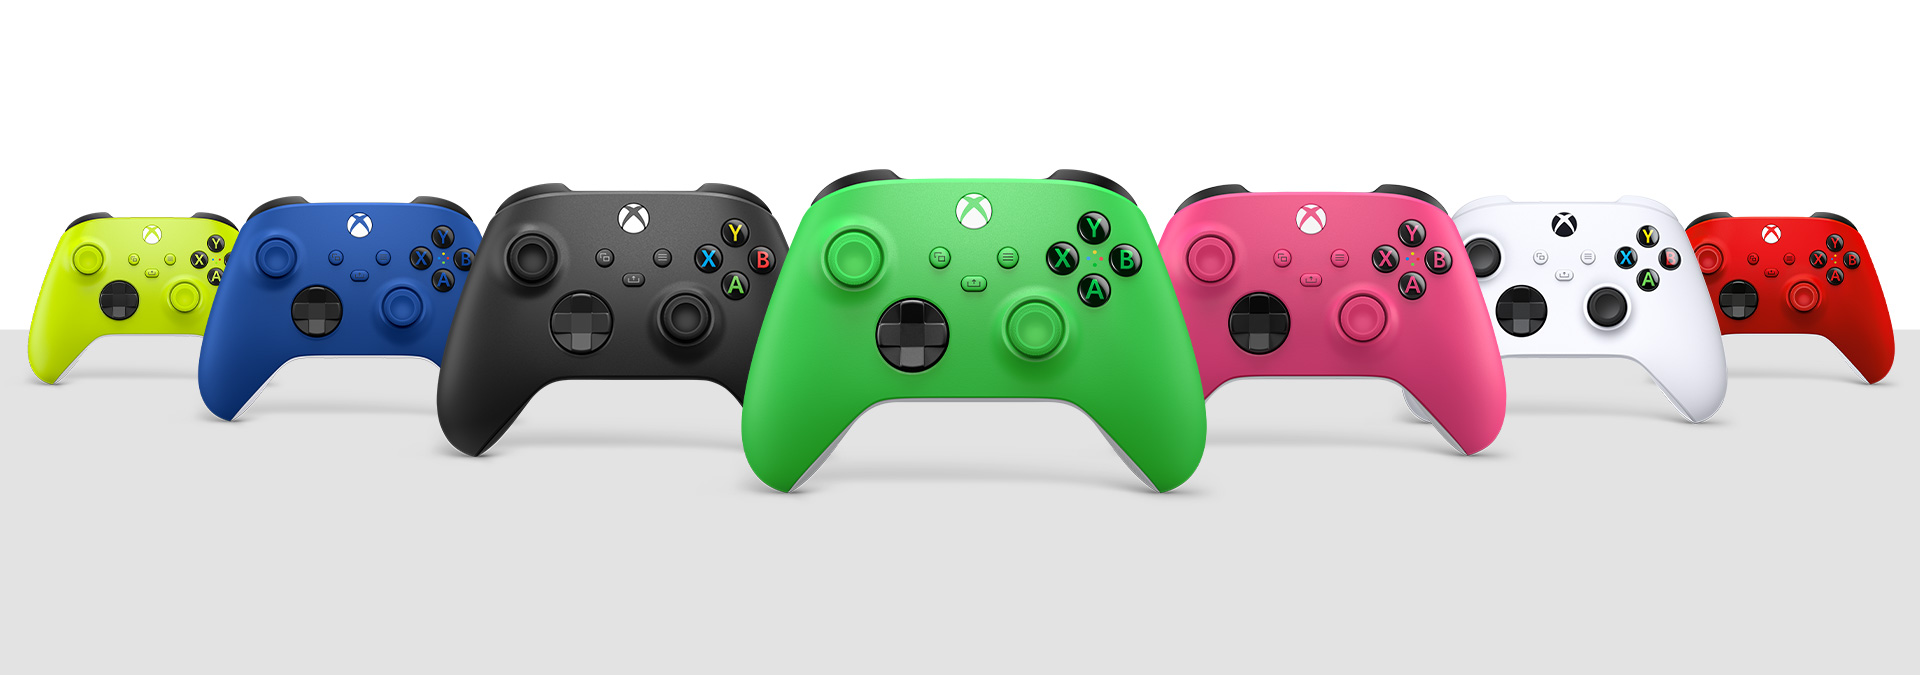 Xbox Wireless Controller in Electric Volt, Shock Blue, Carbon Black, Green, Deep Pink, Robot White und Pulse Red